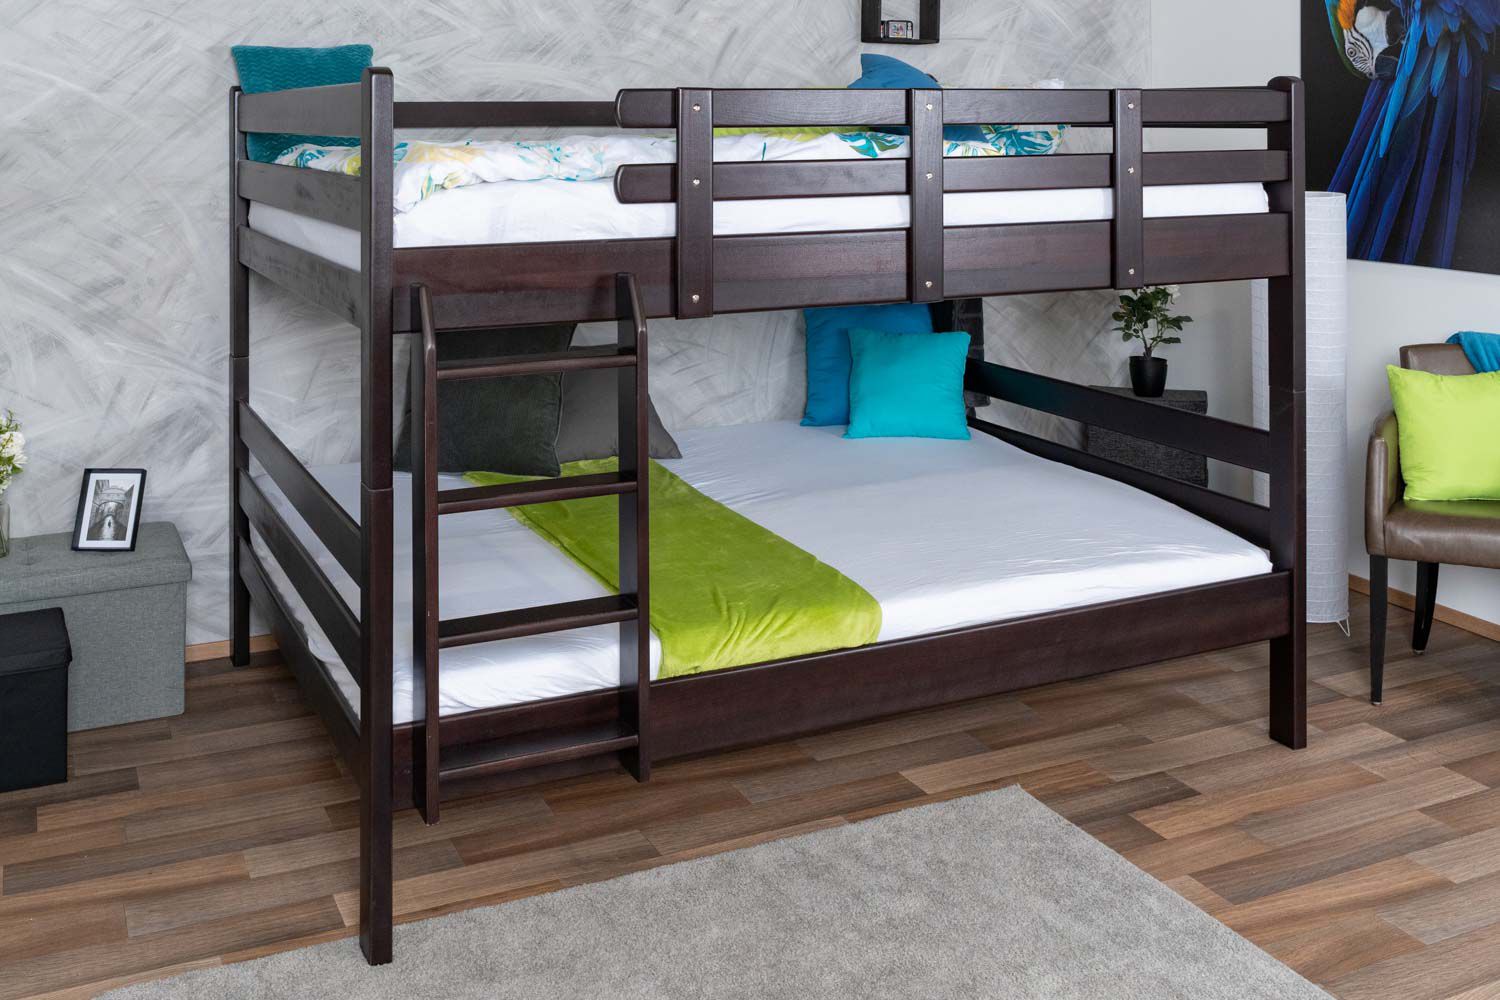 Bunk bed 160 x 200 cm "Easy Premium Line" K24/n, head and foot part straight, solid beech wood, chocolate brown lacquered, convertible